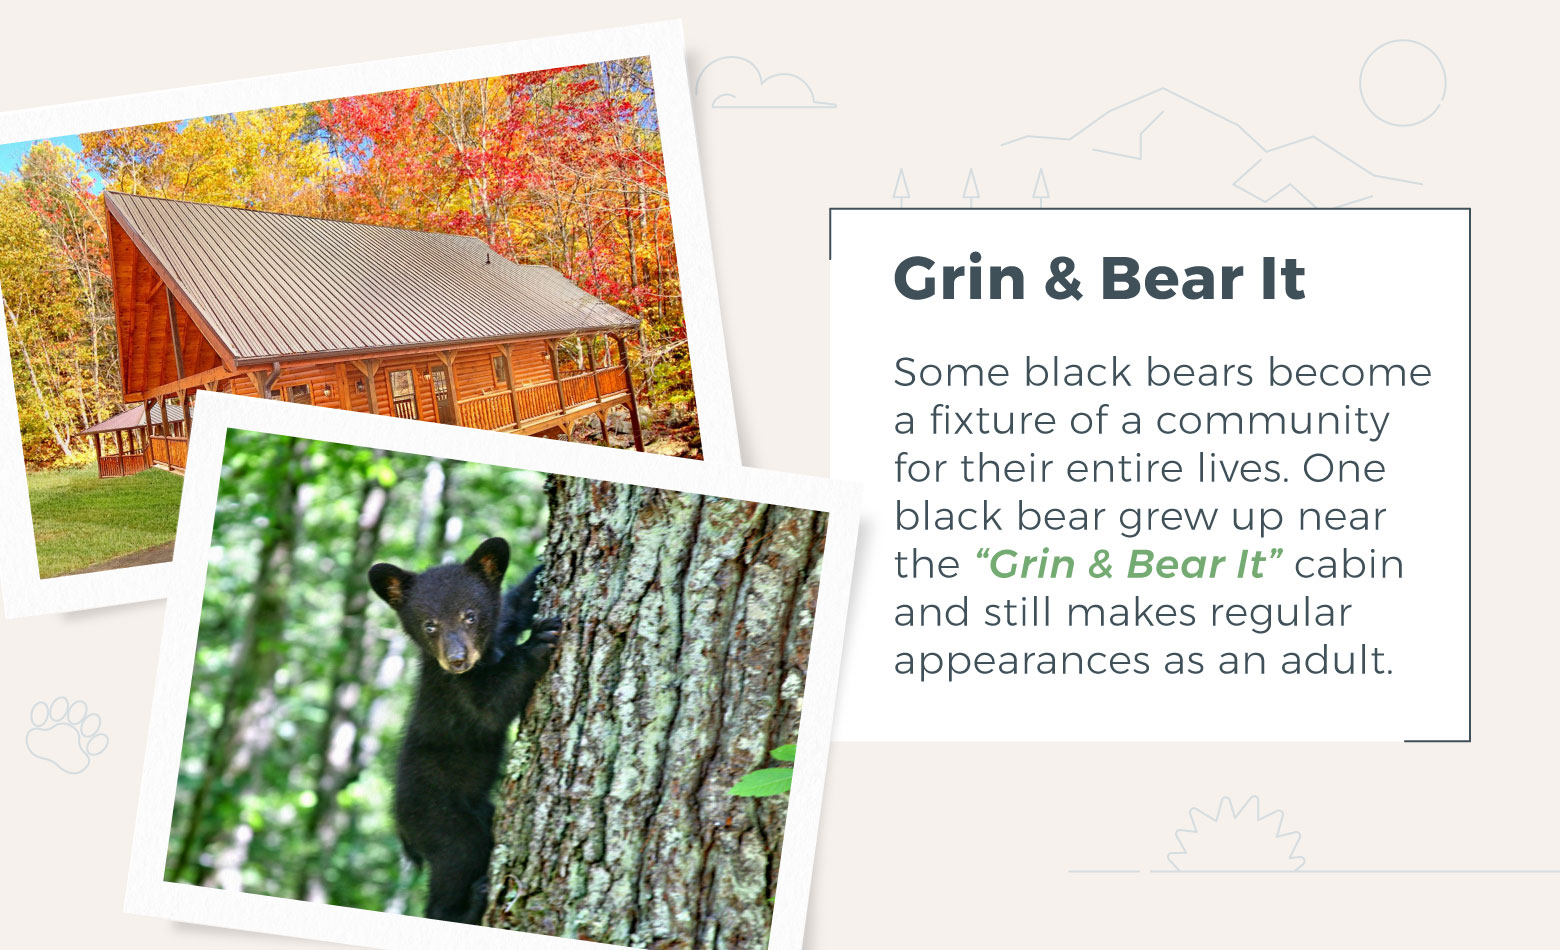 A bear cub that has been spotted at the Grin & Bear It cabin.